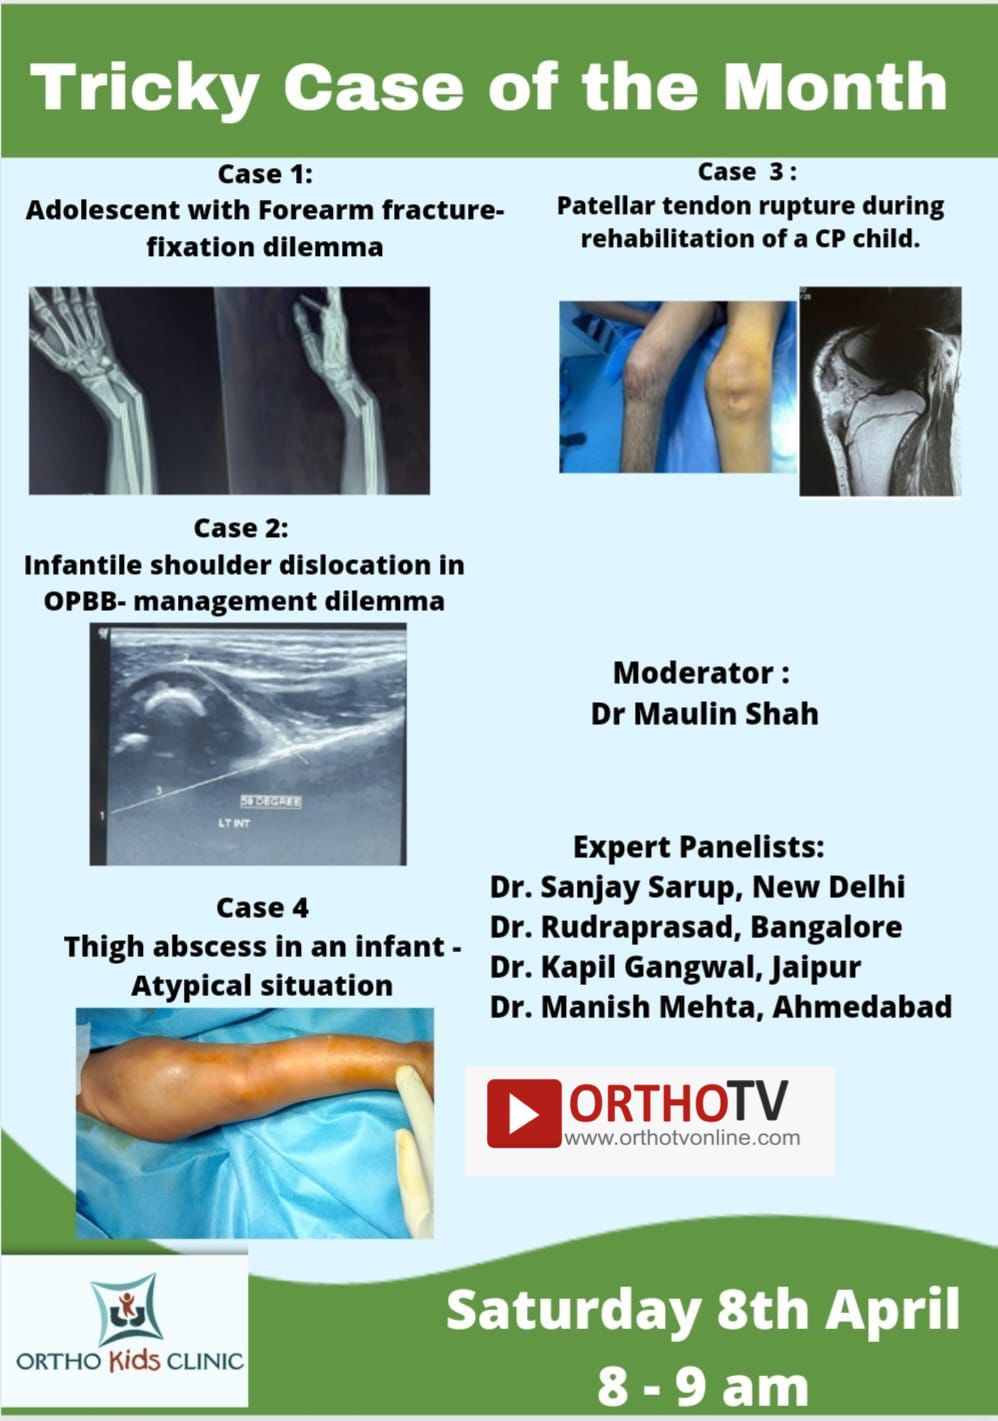 Adolescent with Forearm fracture-fixation dilemma